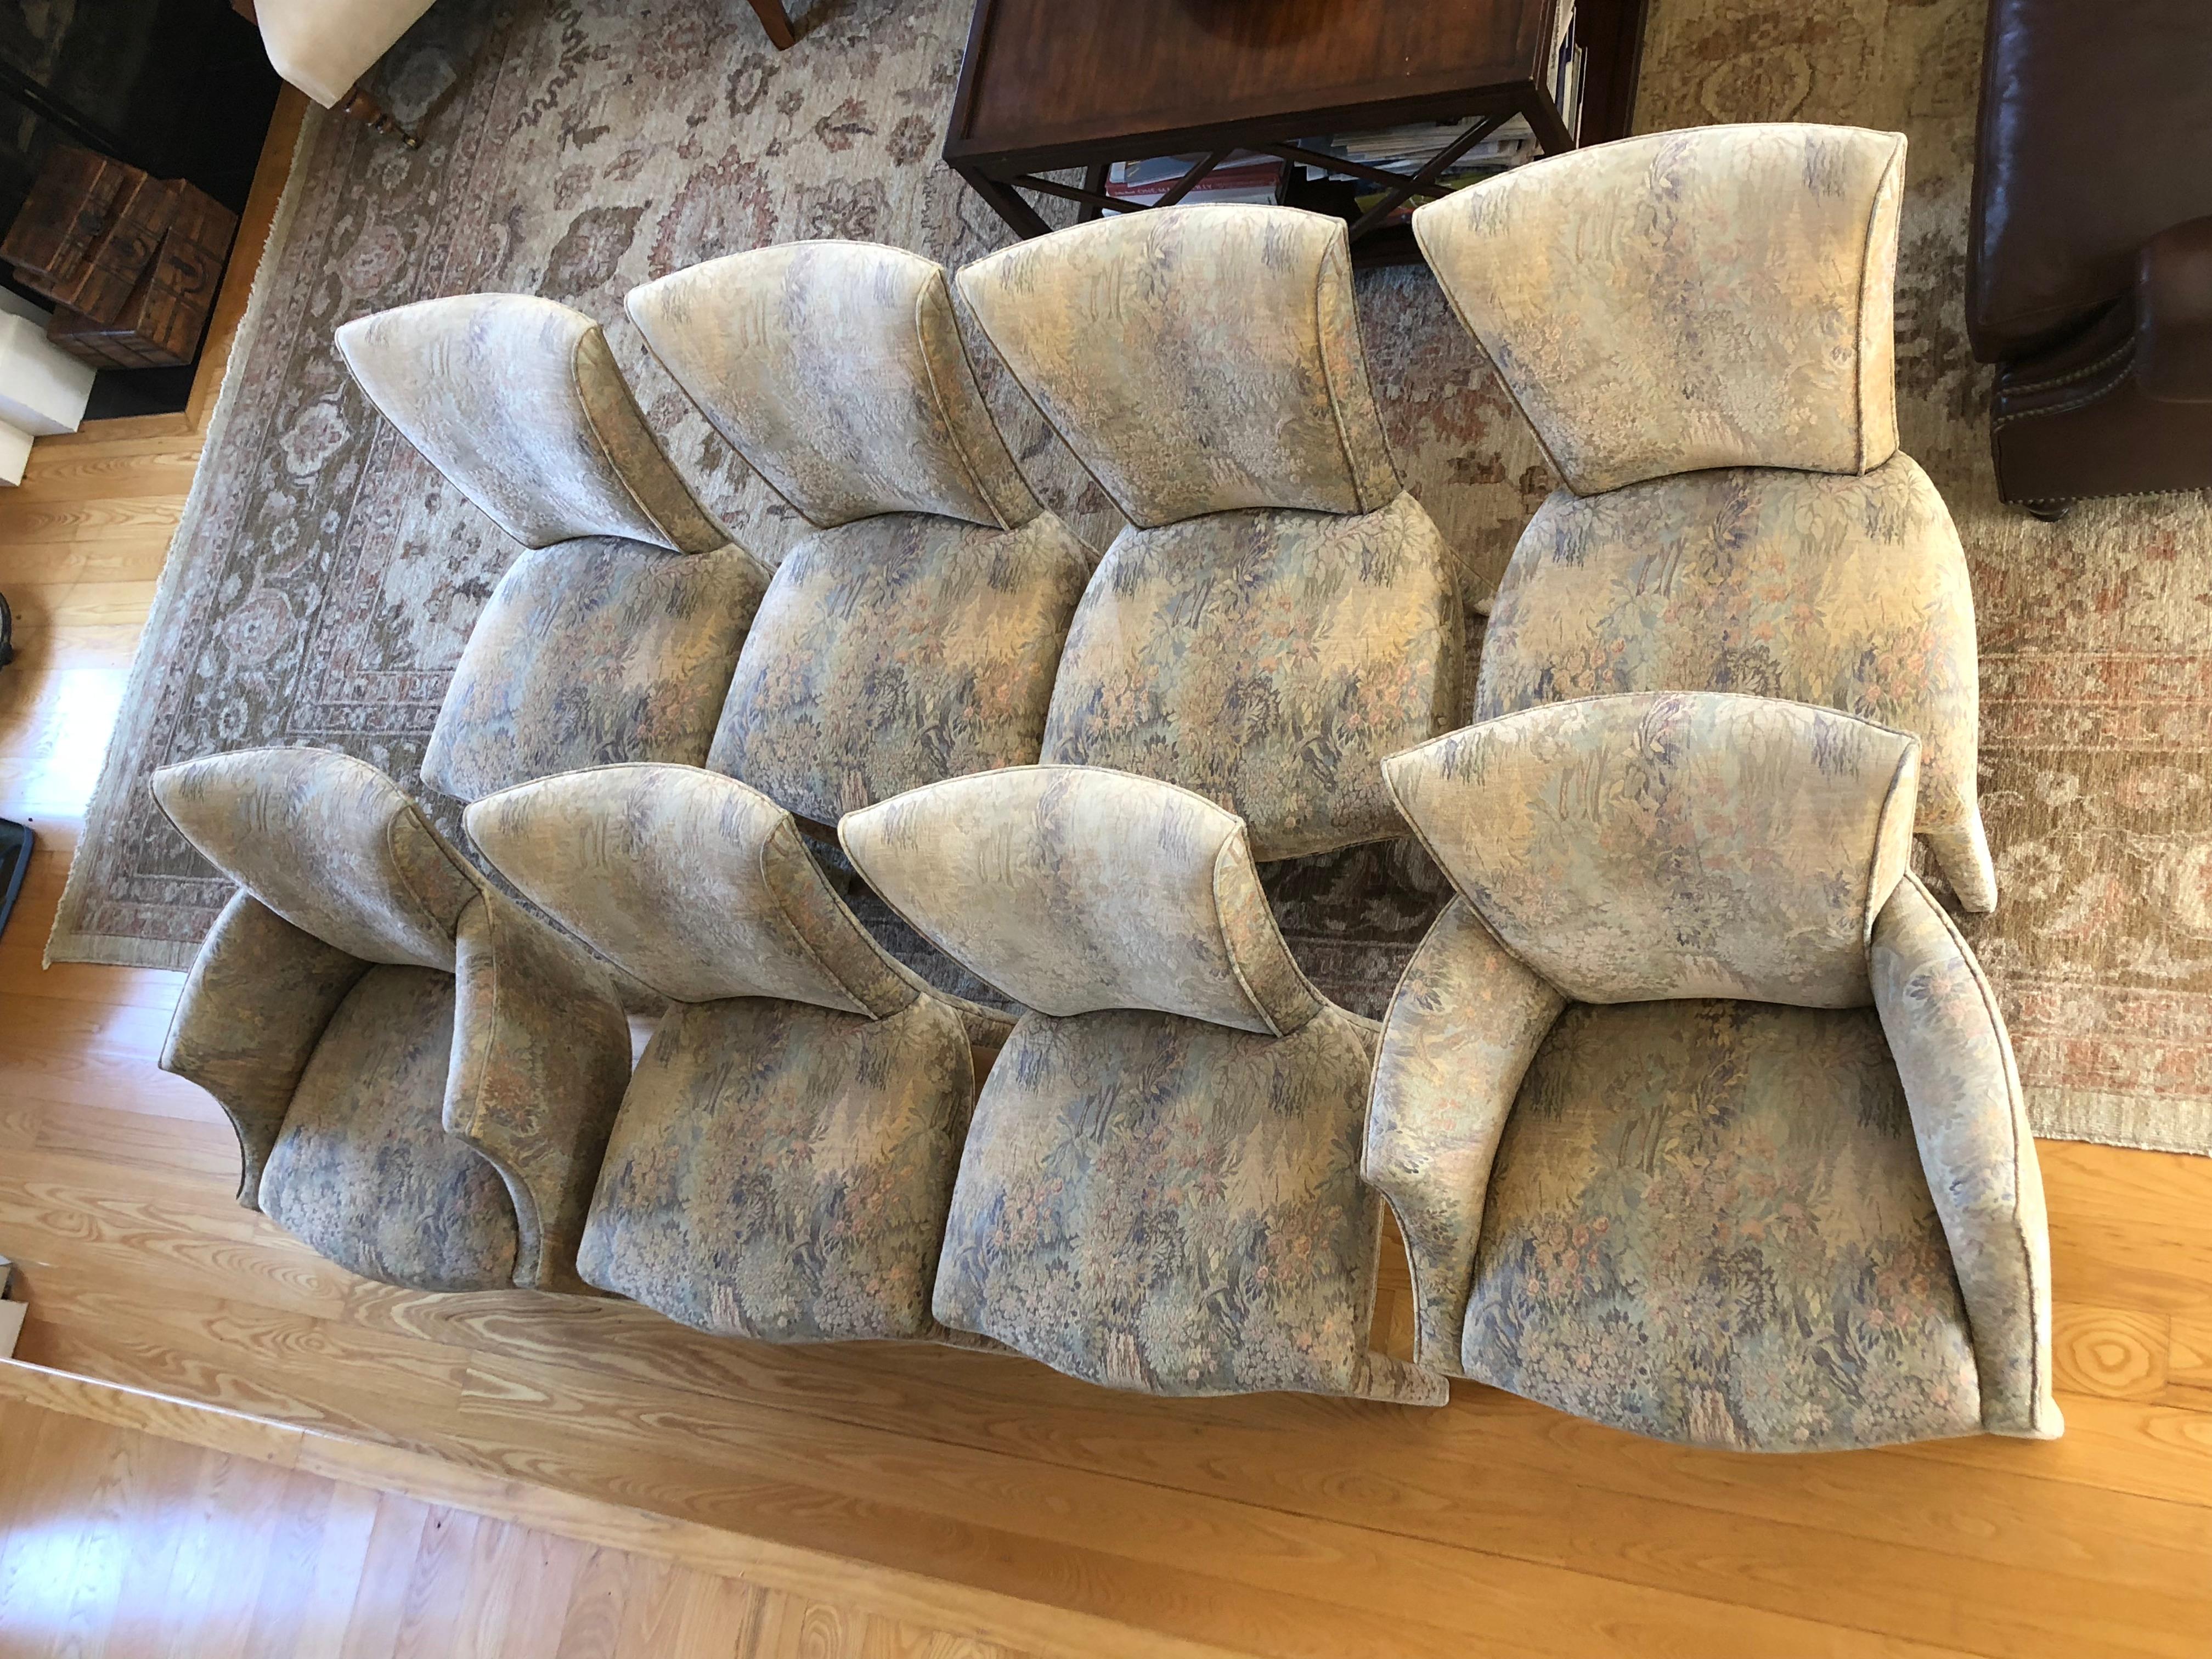 A sophisticated set of 8 dining chairs by Donghia fully upholstered in a raised tapestry with welt detail and legs that offer an understated elegance. There are two armchairs and 6 side chairs. The color palette is beigey grey mixed with hues of